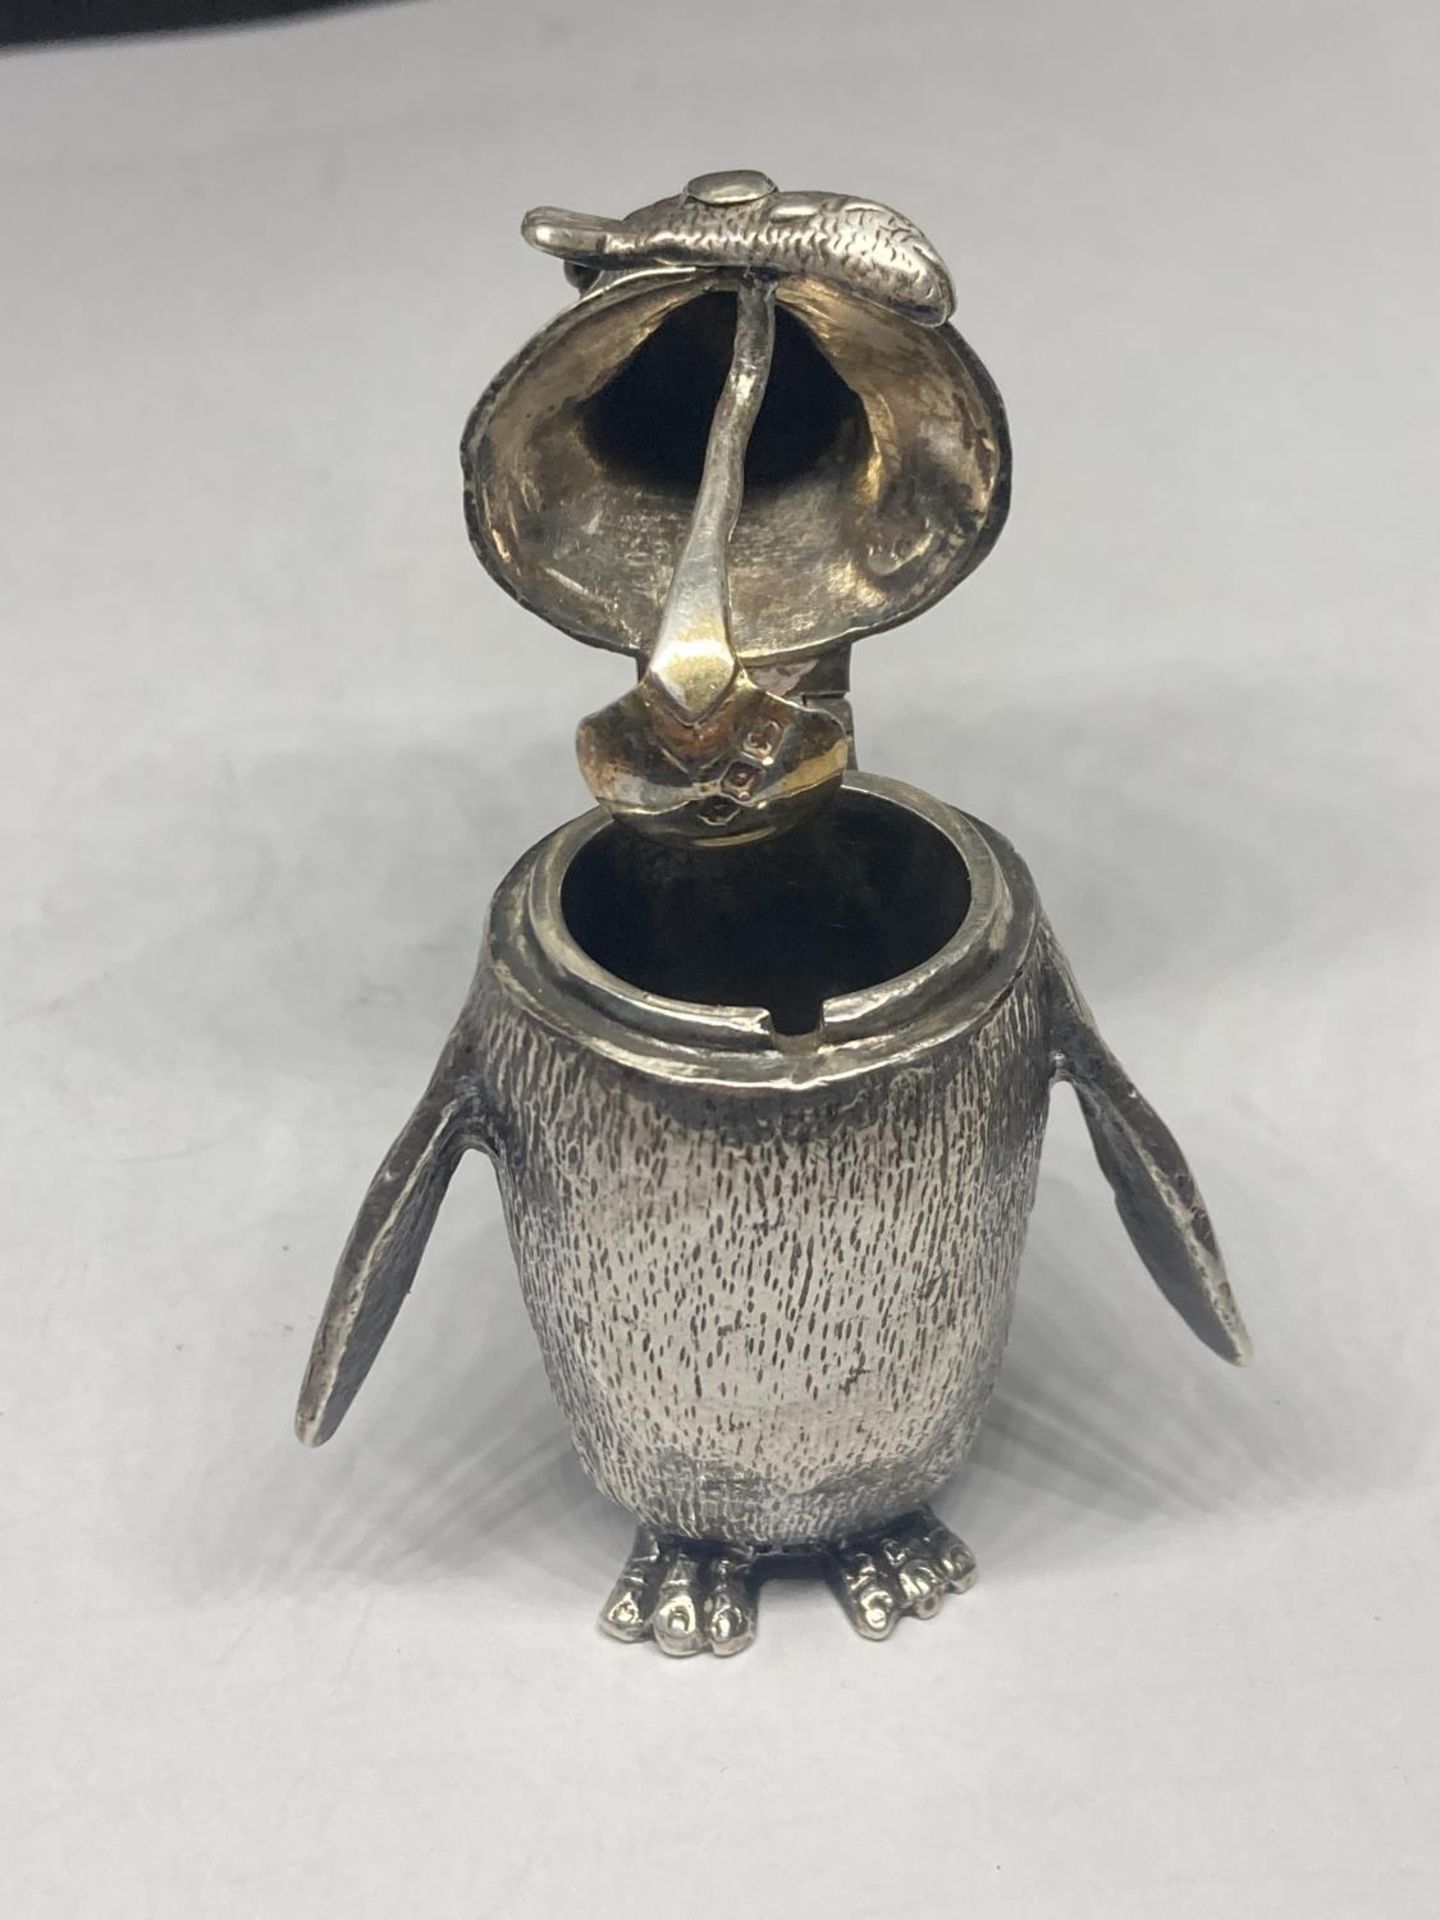 A HALLMARKED LONDON SILVER CRUET SET IN THE FORM OF THREE PENGUINS GROSS WEIGHT 279.3 GRAMS - Image 6 of 11